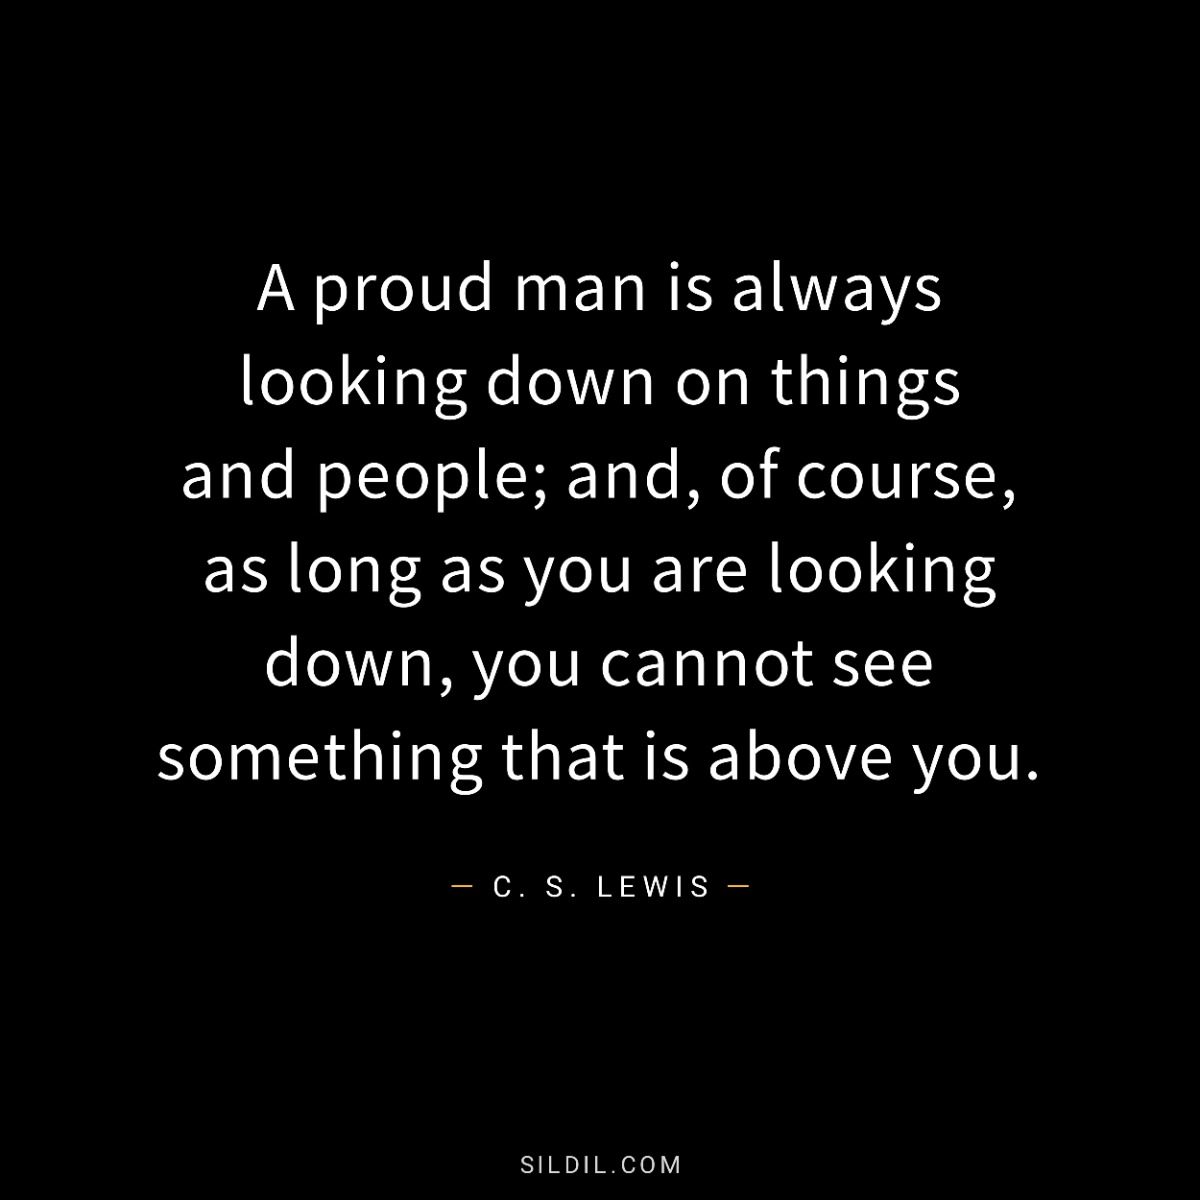 A proud man is always looking down on things and people; and, of course, as long as you are looking down, you cannot see something that is above you.